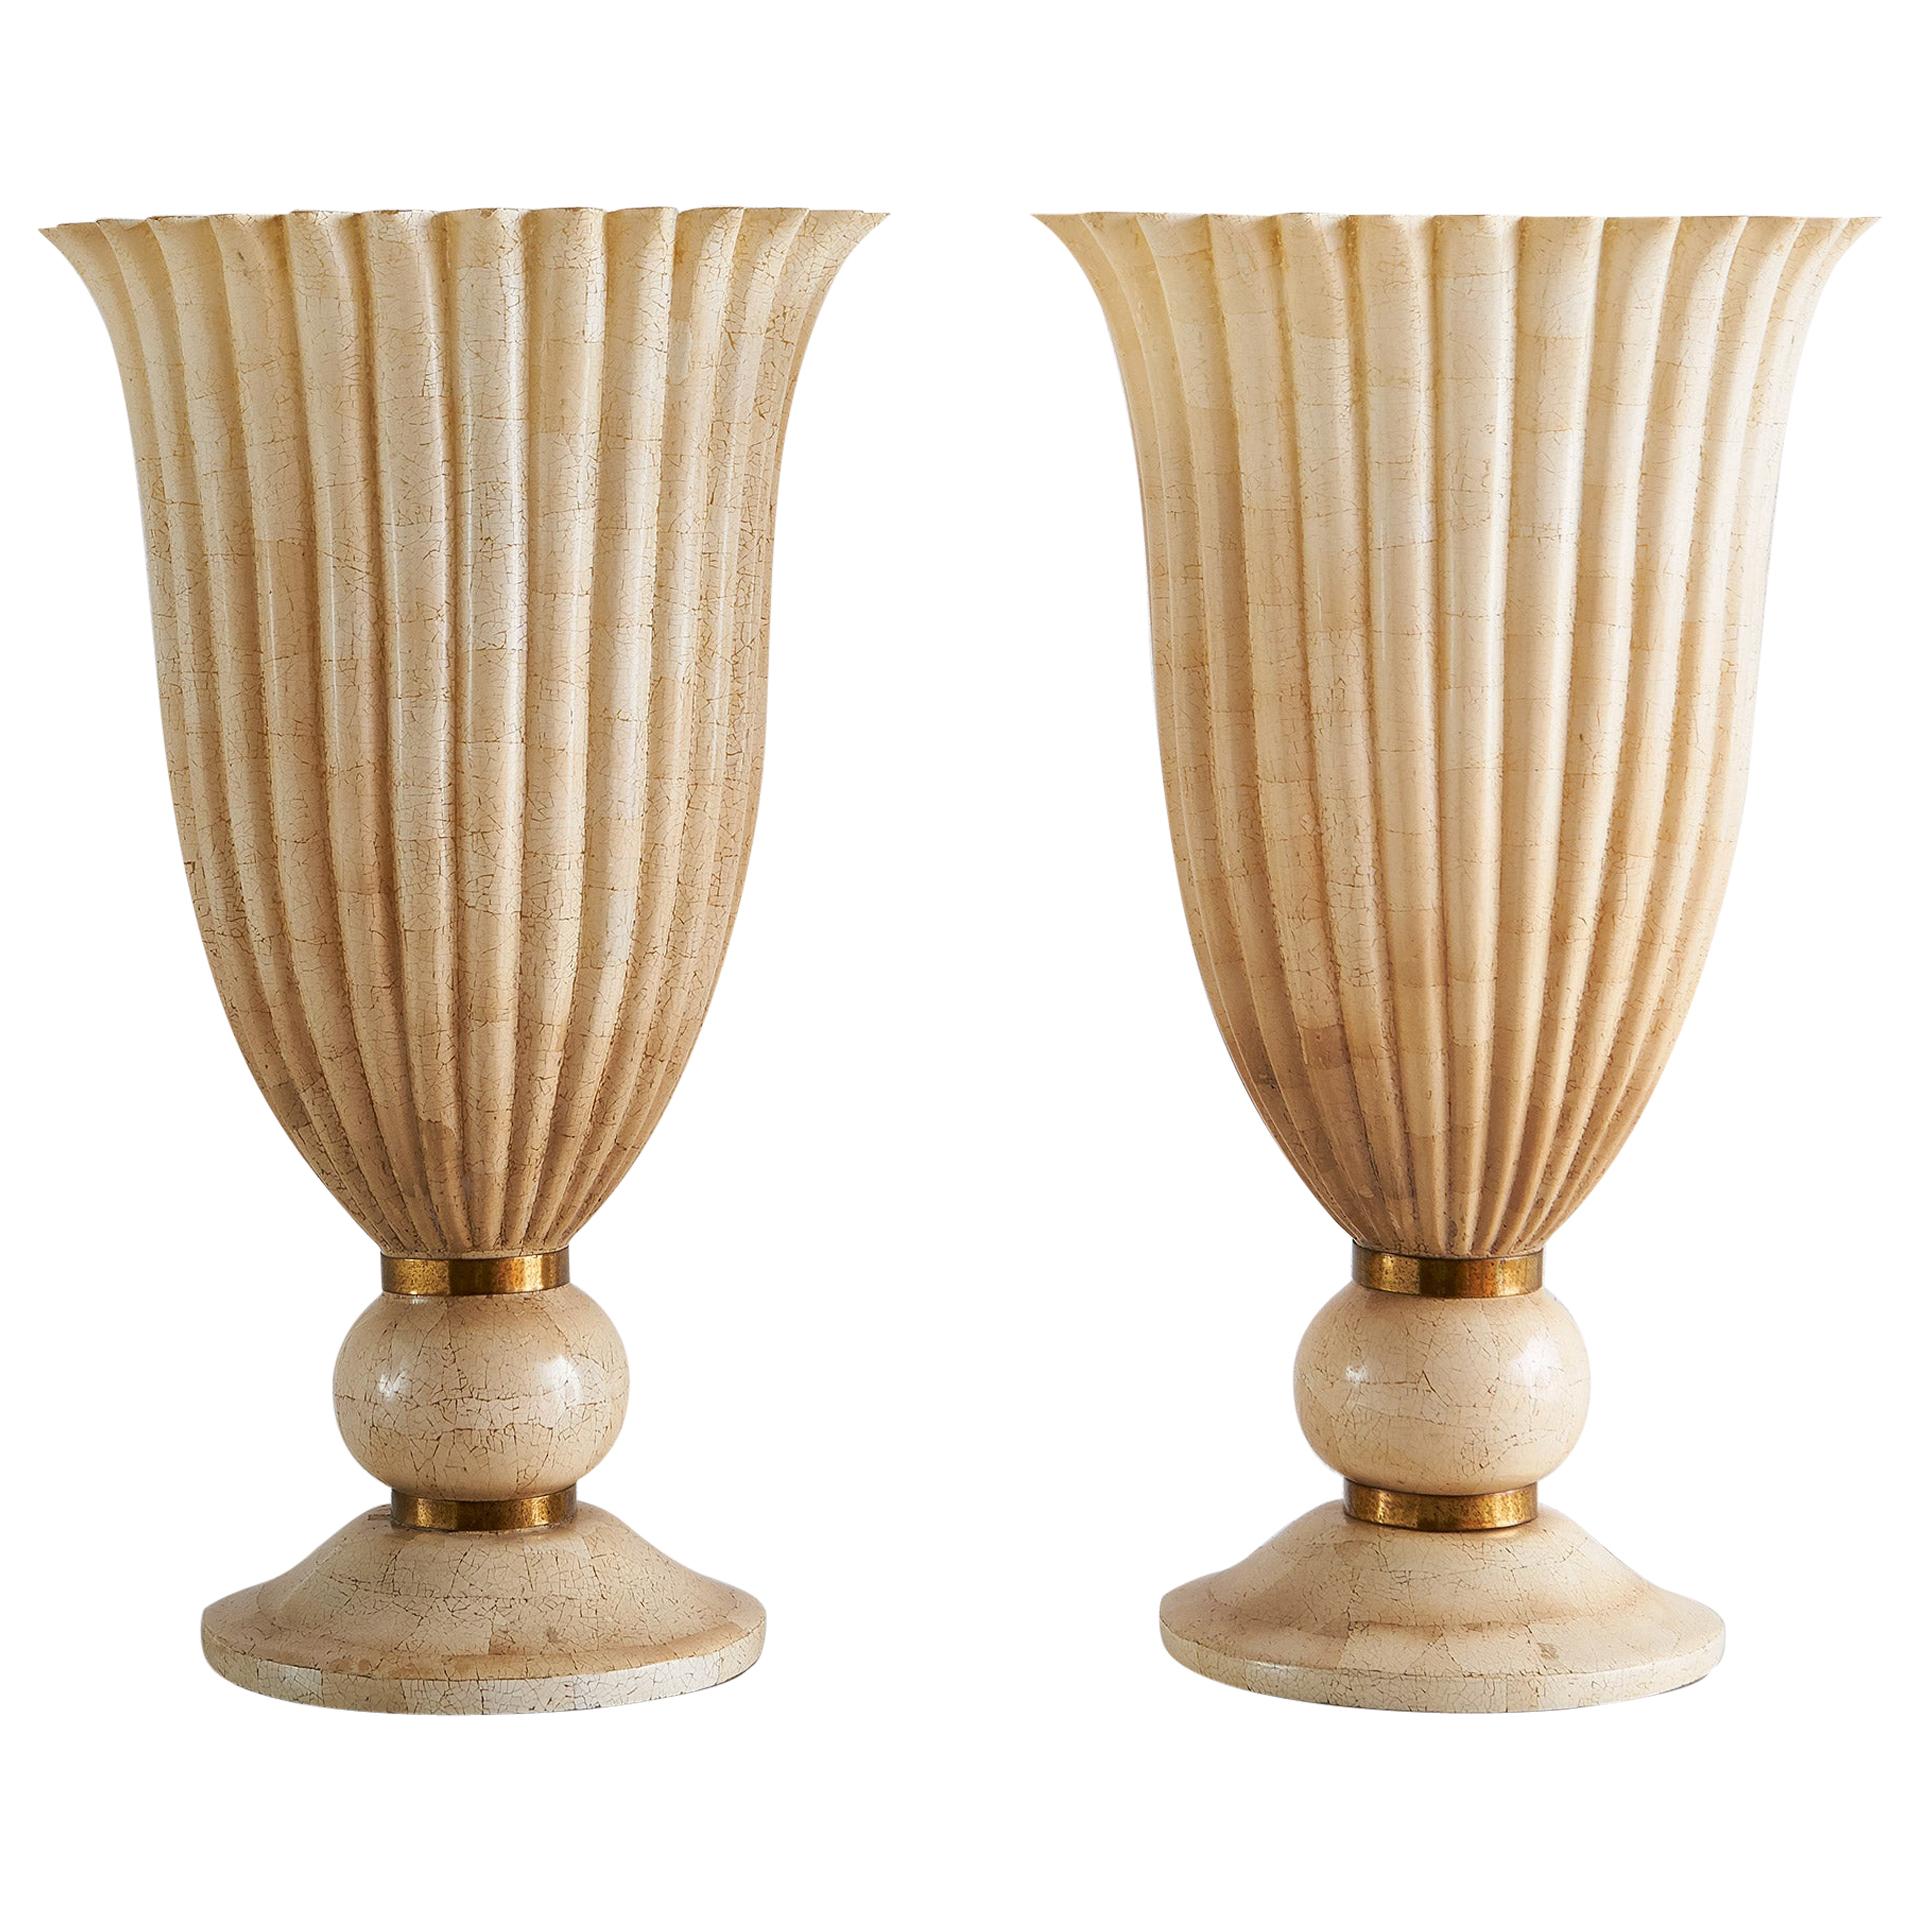 Pair of Maitland Smith Torchiere Lamps